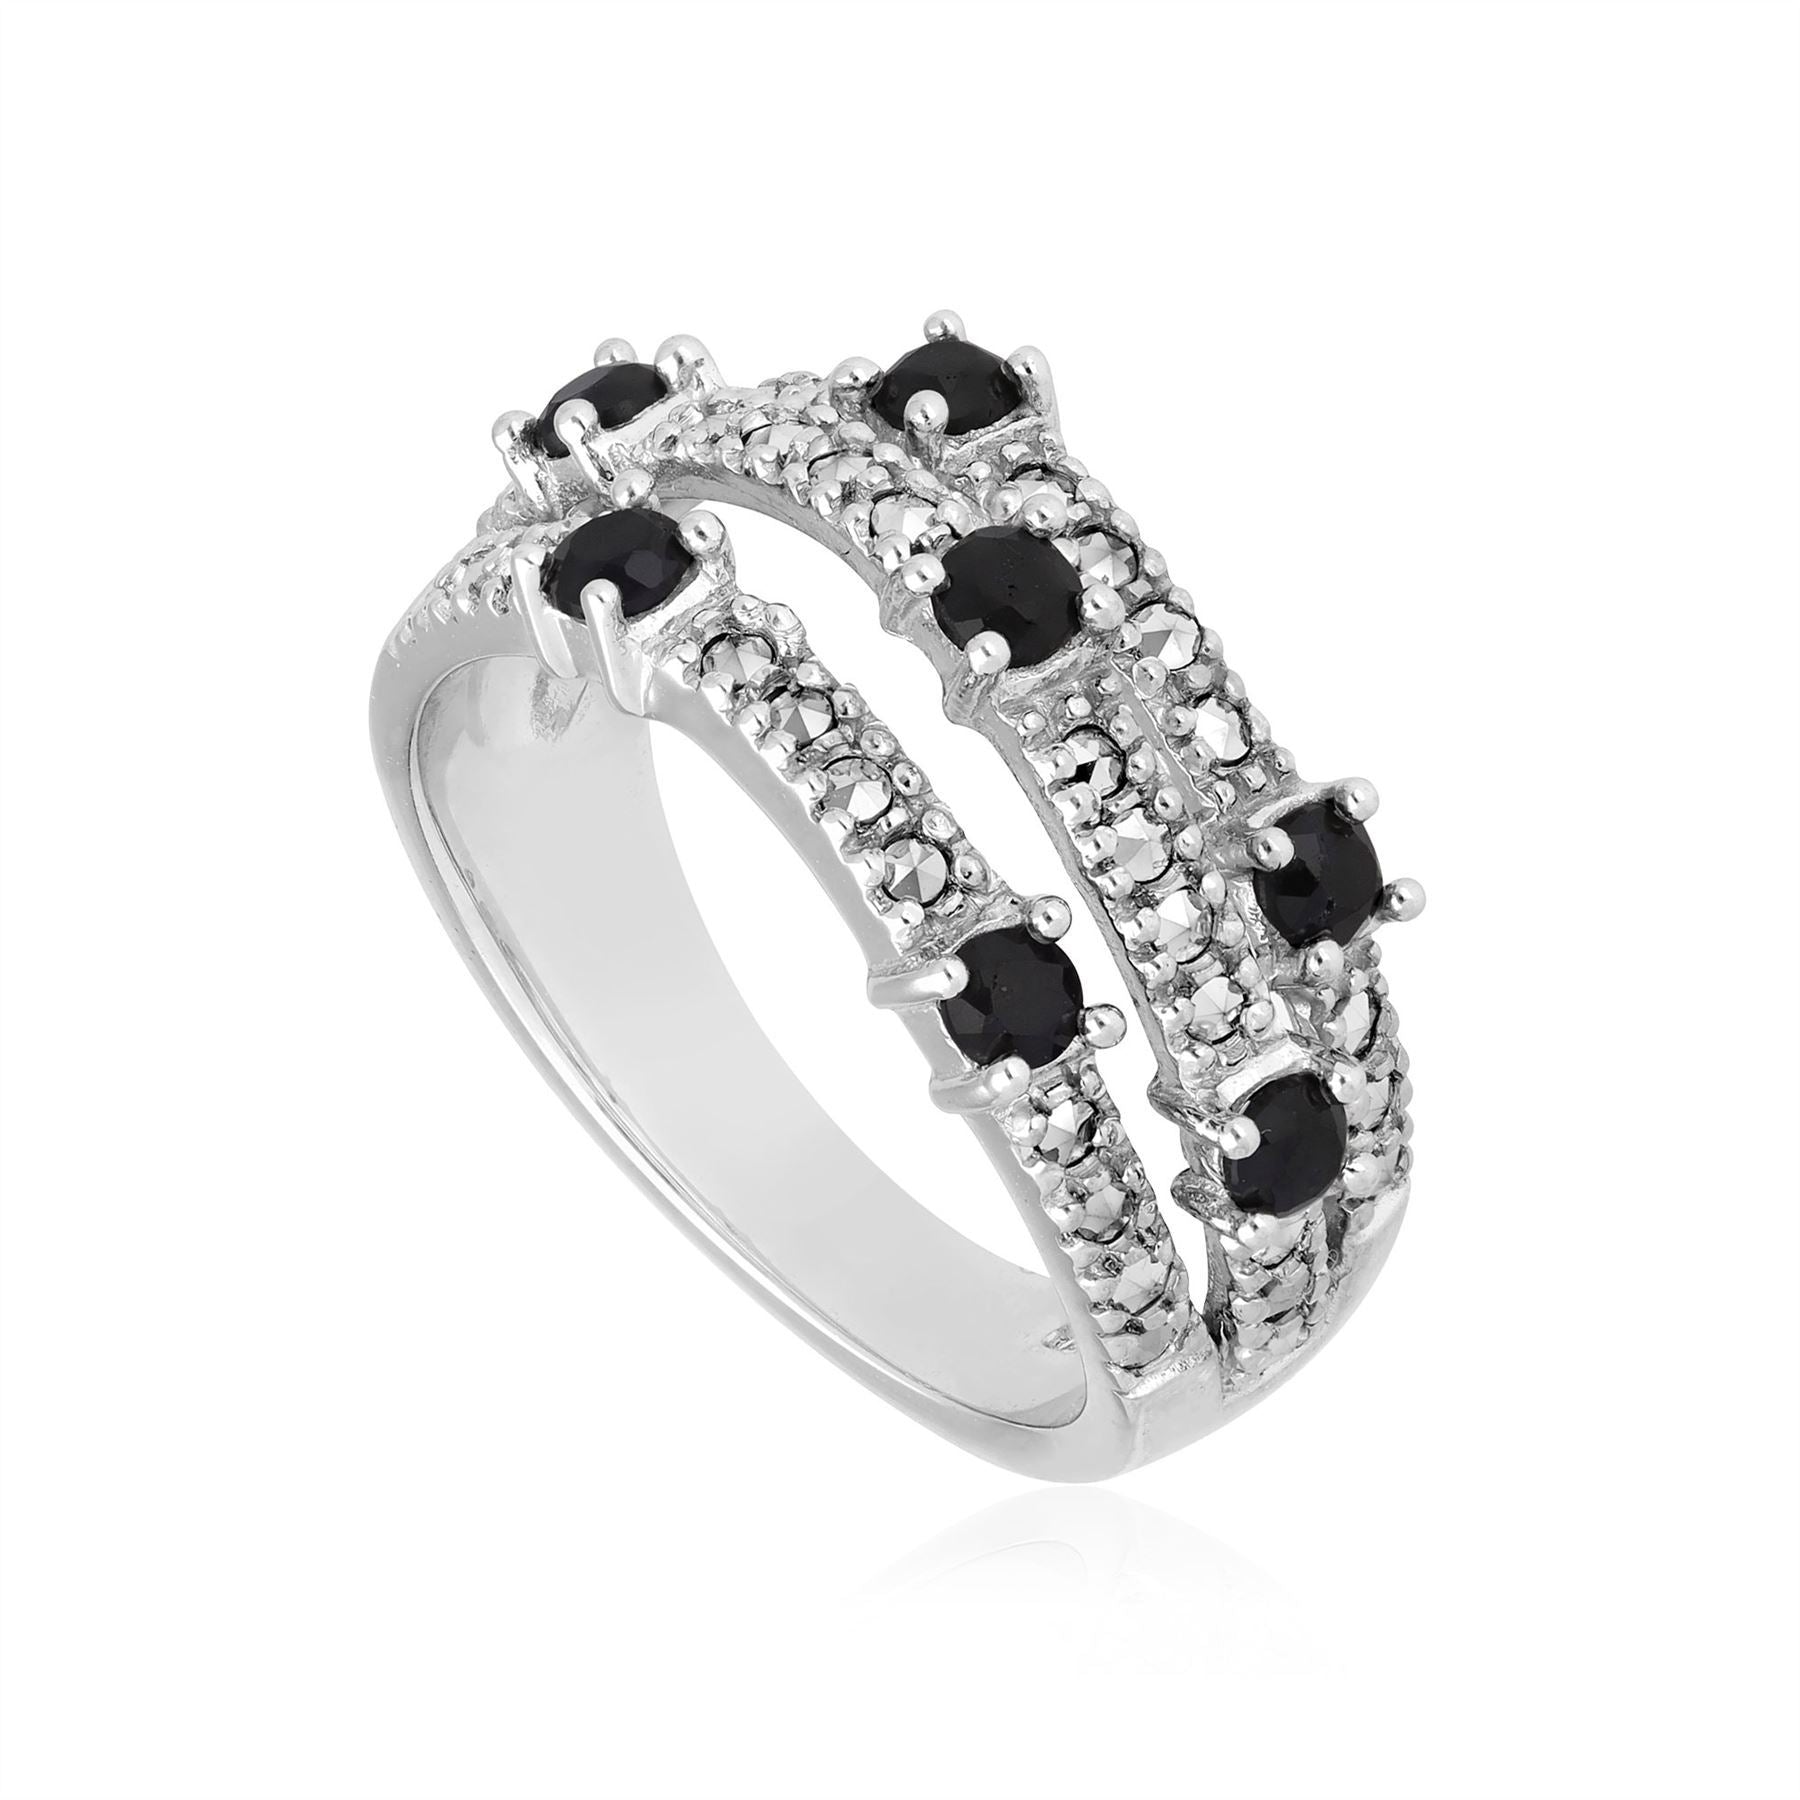 Kosmos Black Sapphire and Marcasite Ring in Sterling Silver